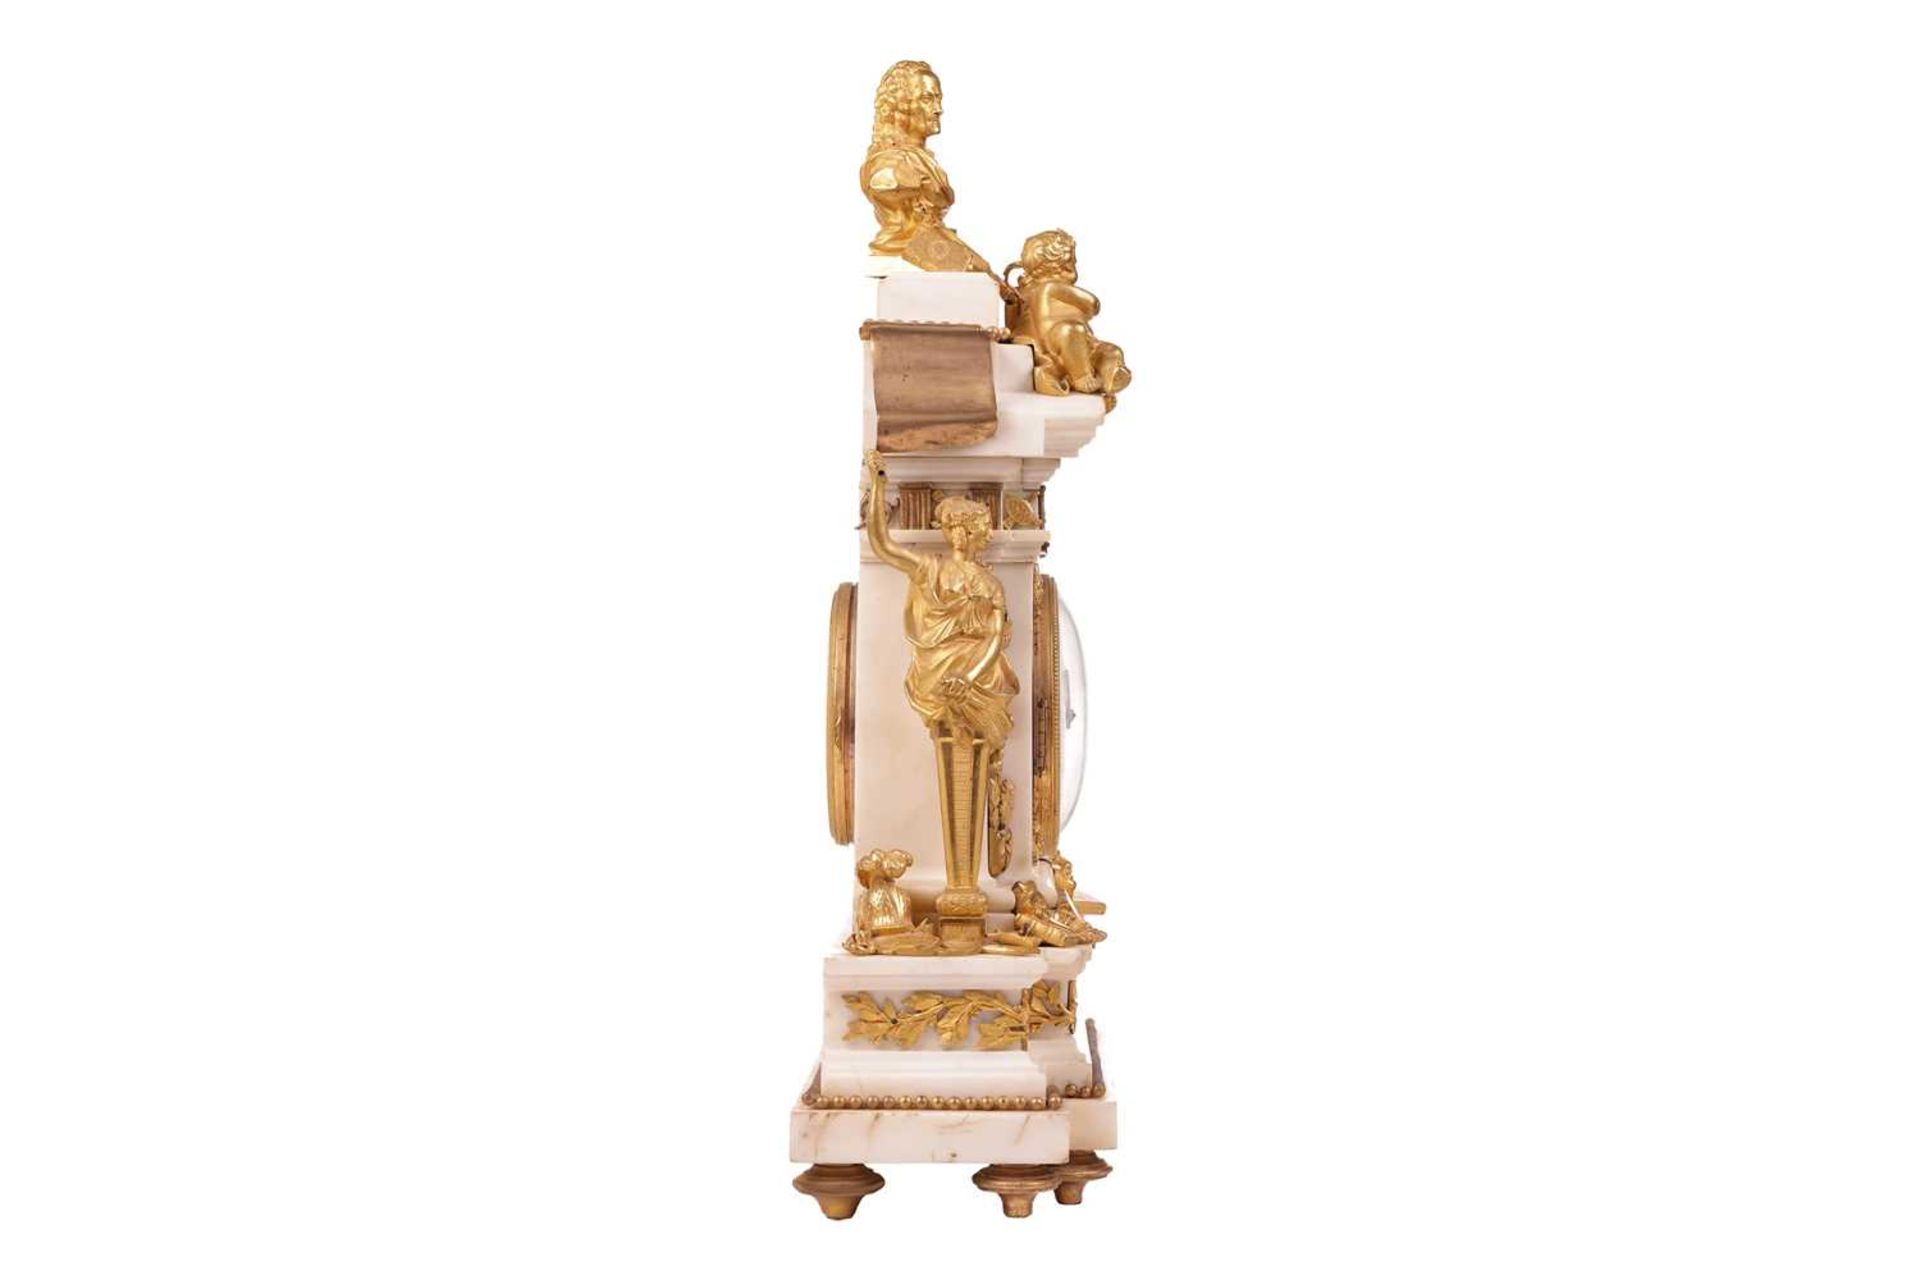 A large and ornate Louis XVI French marble and ormolu-mounted figural mantle clock, of architectural - Image 6 of 23